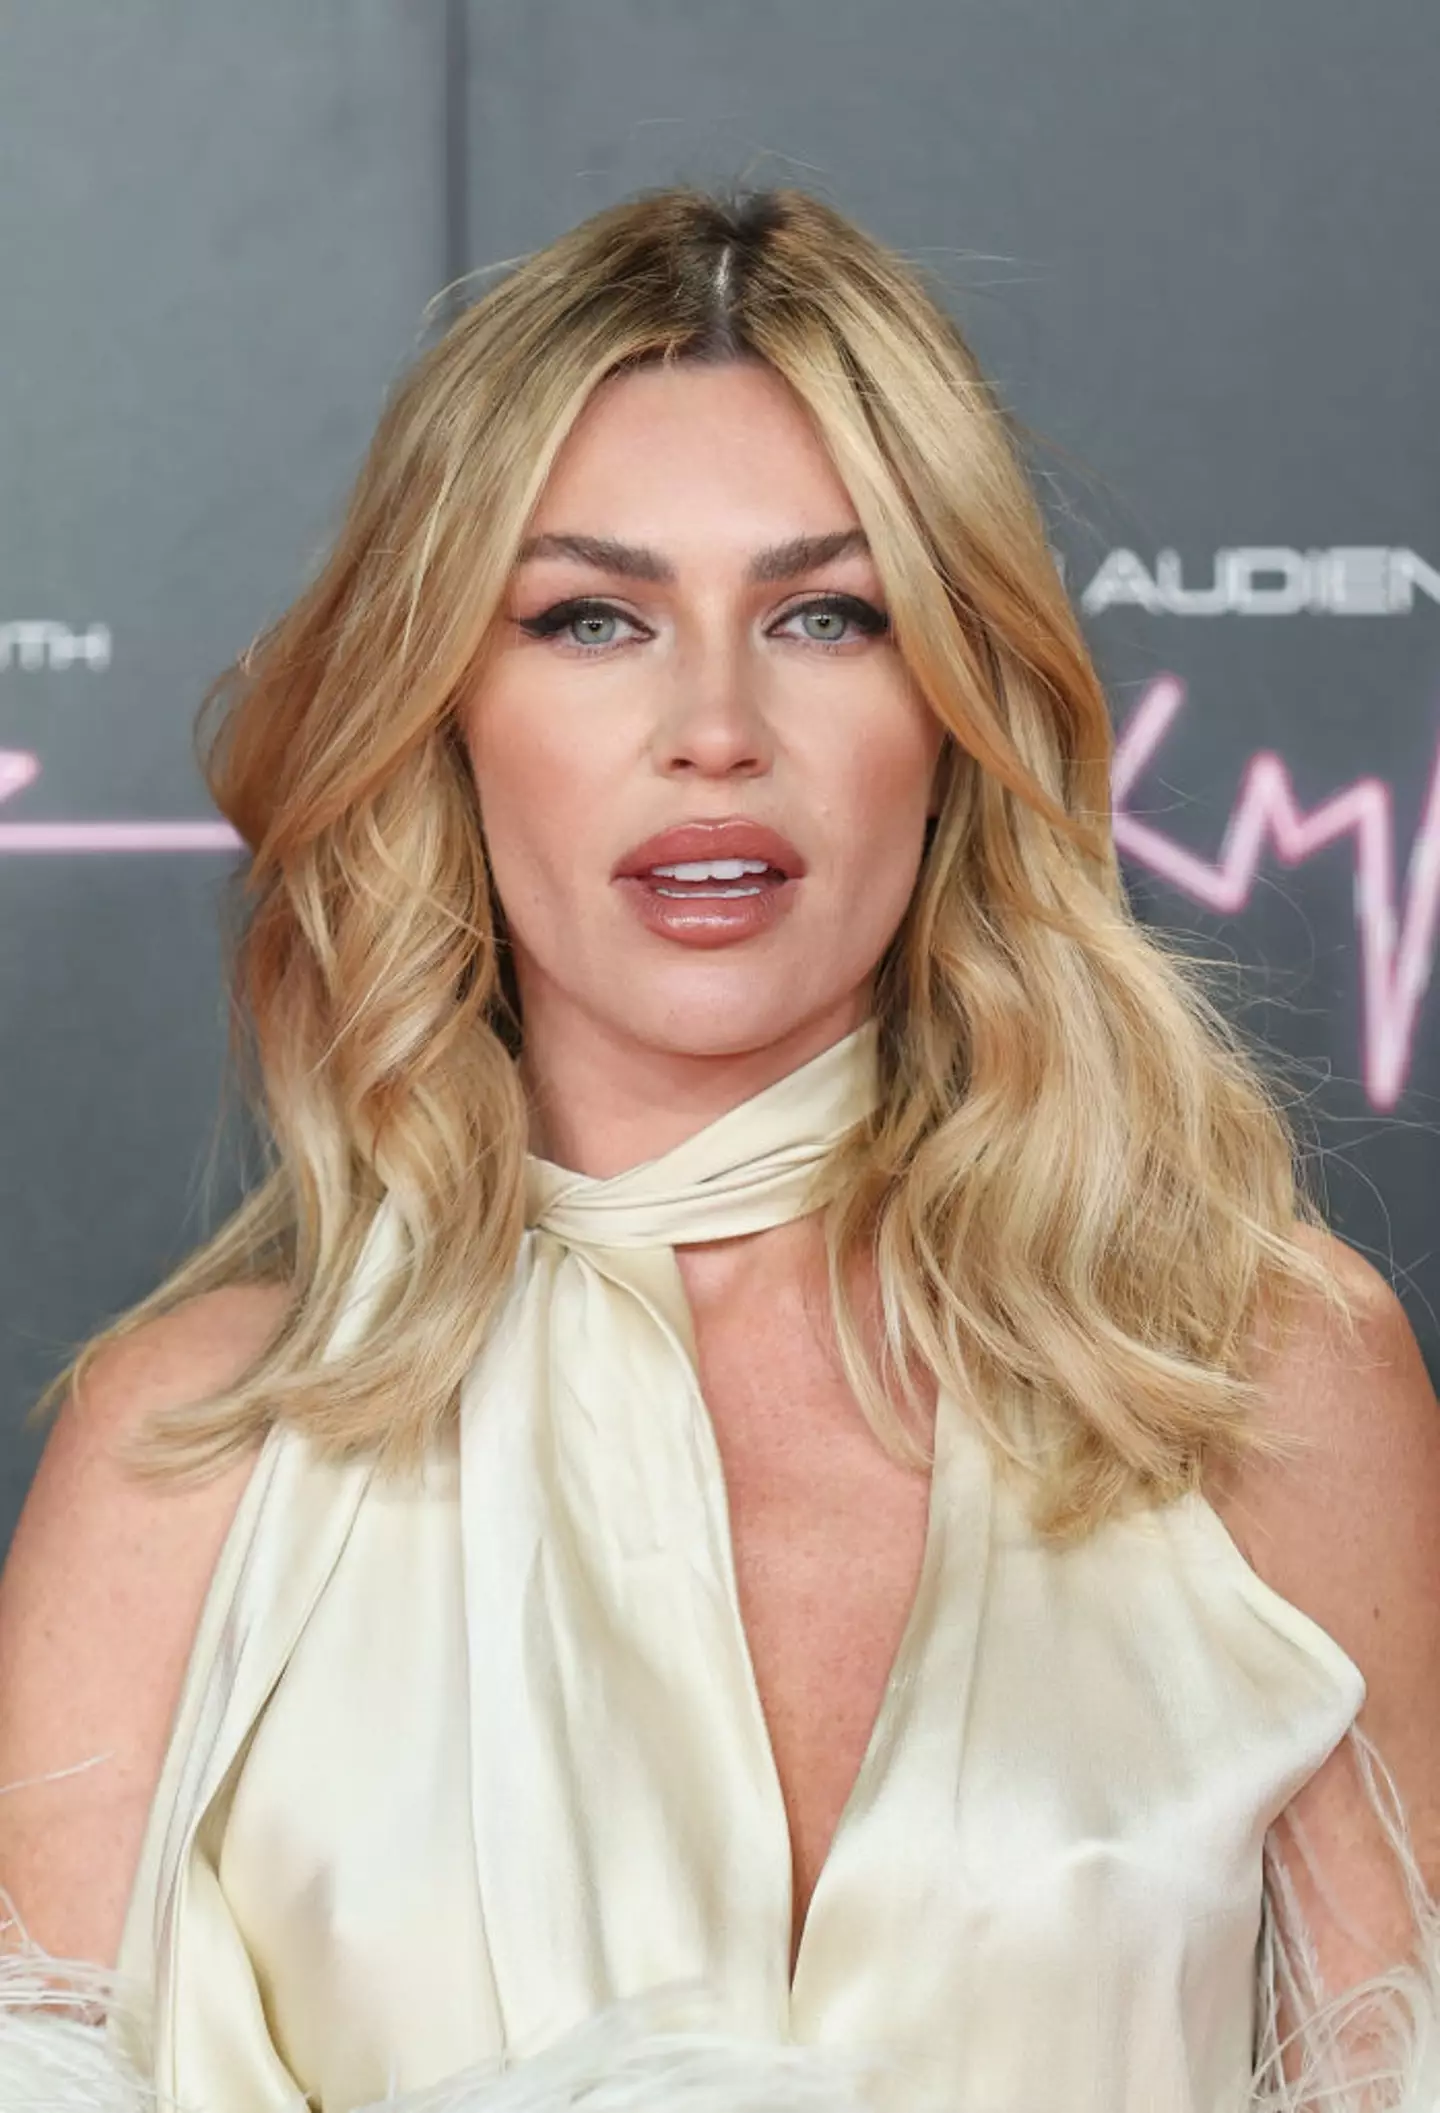 Abbey Clancy has opened up about a recent health scare which left her terrified.